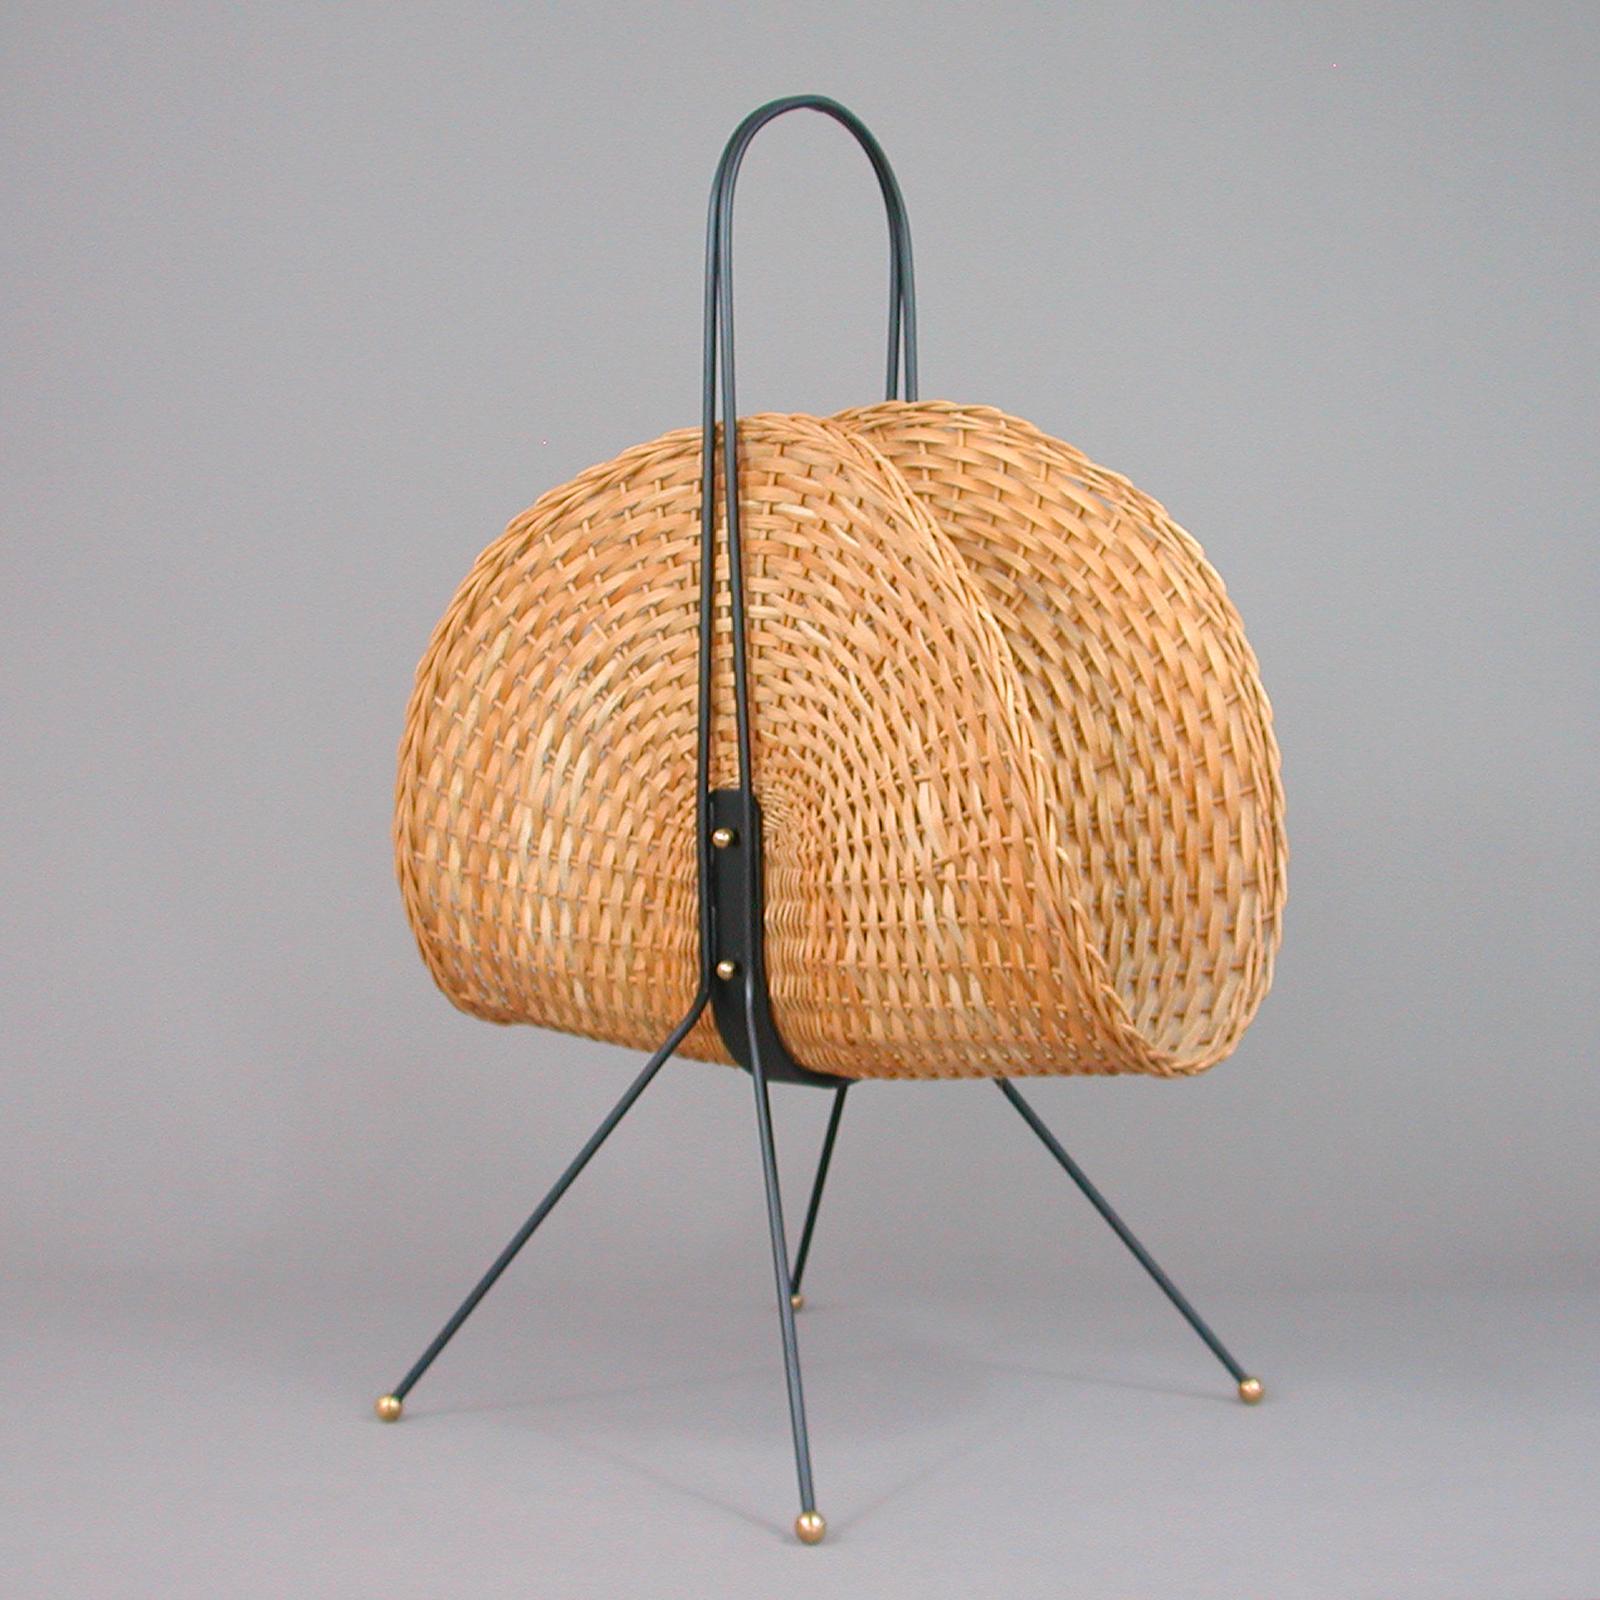 This unusual elegant rattan magazine rack was designed and manufactured in Sweden in the 1960s. It features a streamline woven rattan basket, a black enameled metal frame and brass details.